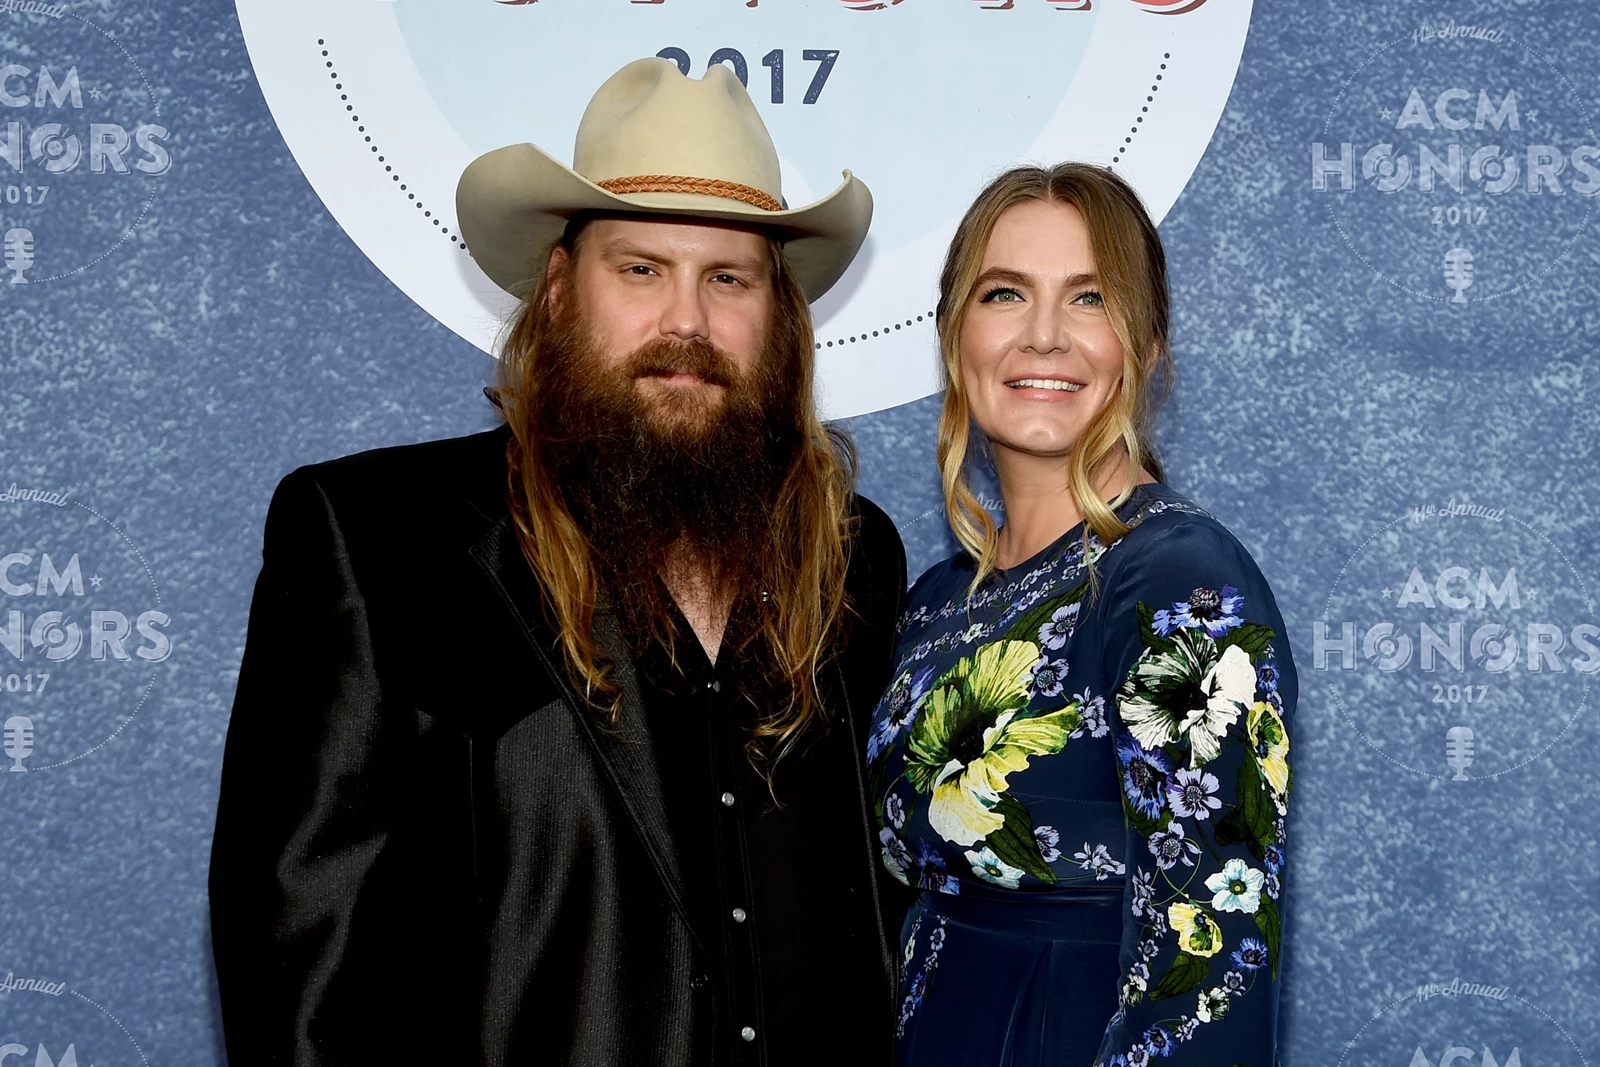 Chris Stapleton Shares Adoring Anniversary Message for His Wife WKKY